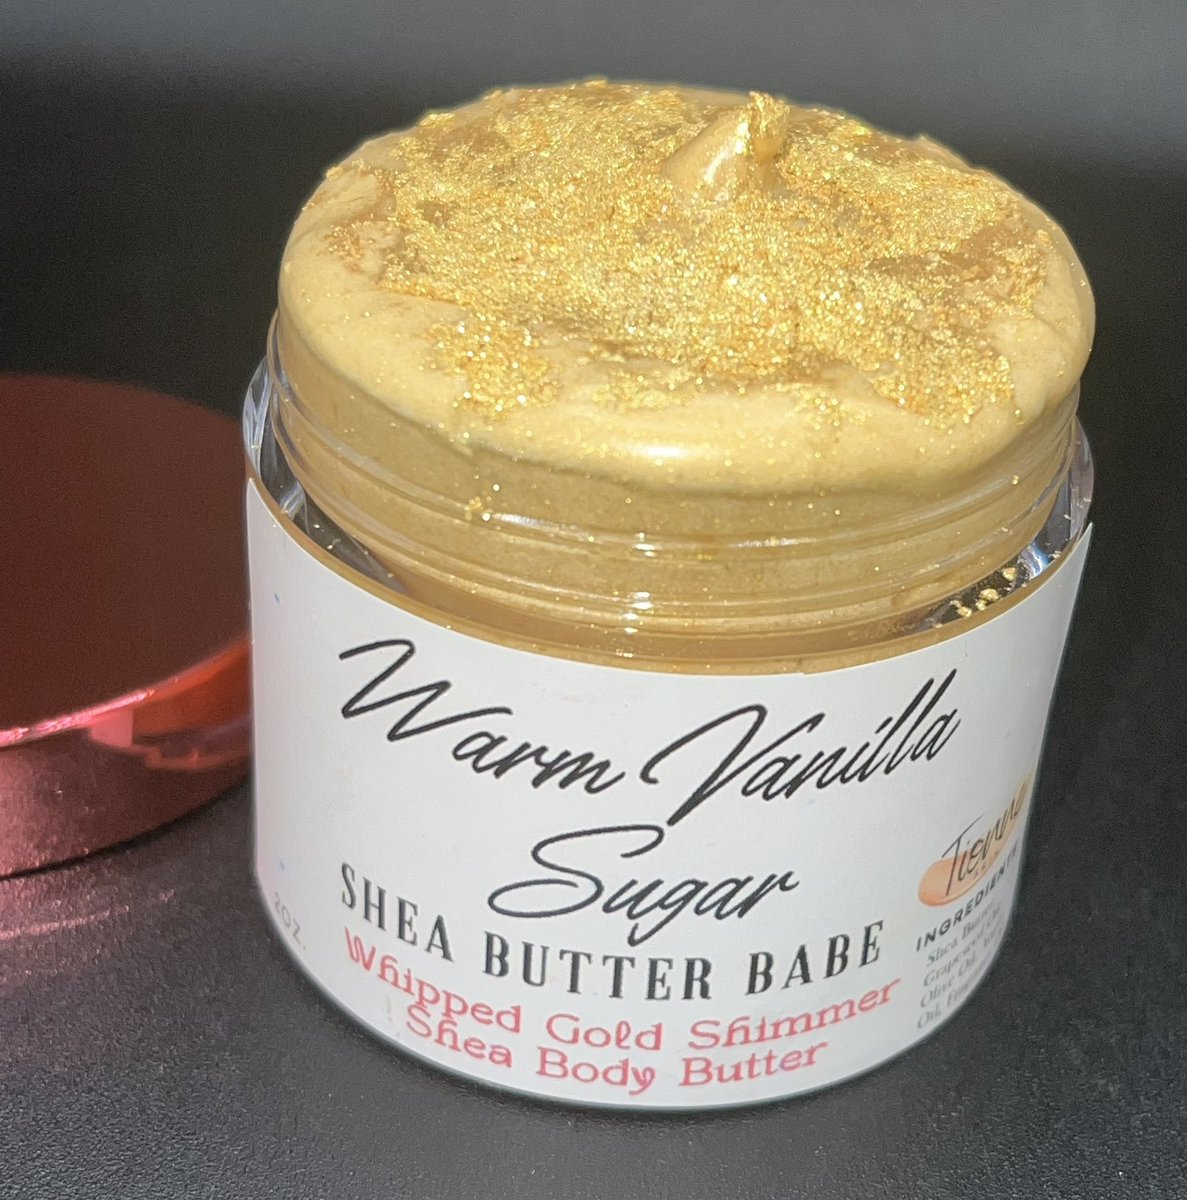 My Body Butters are ideal for soft smooth, moisturized and glowing skin! Helps with many skin issues such as: -Dry skin, eczema, psoriasis, & dermatitis -Cracked skin, peeling skin, rough skin, dull skin etc -Dark spots, acne scars, hyperpigmentation & uneven skin tone